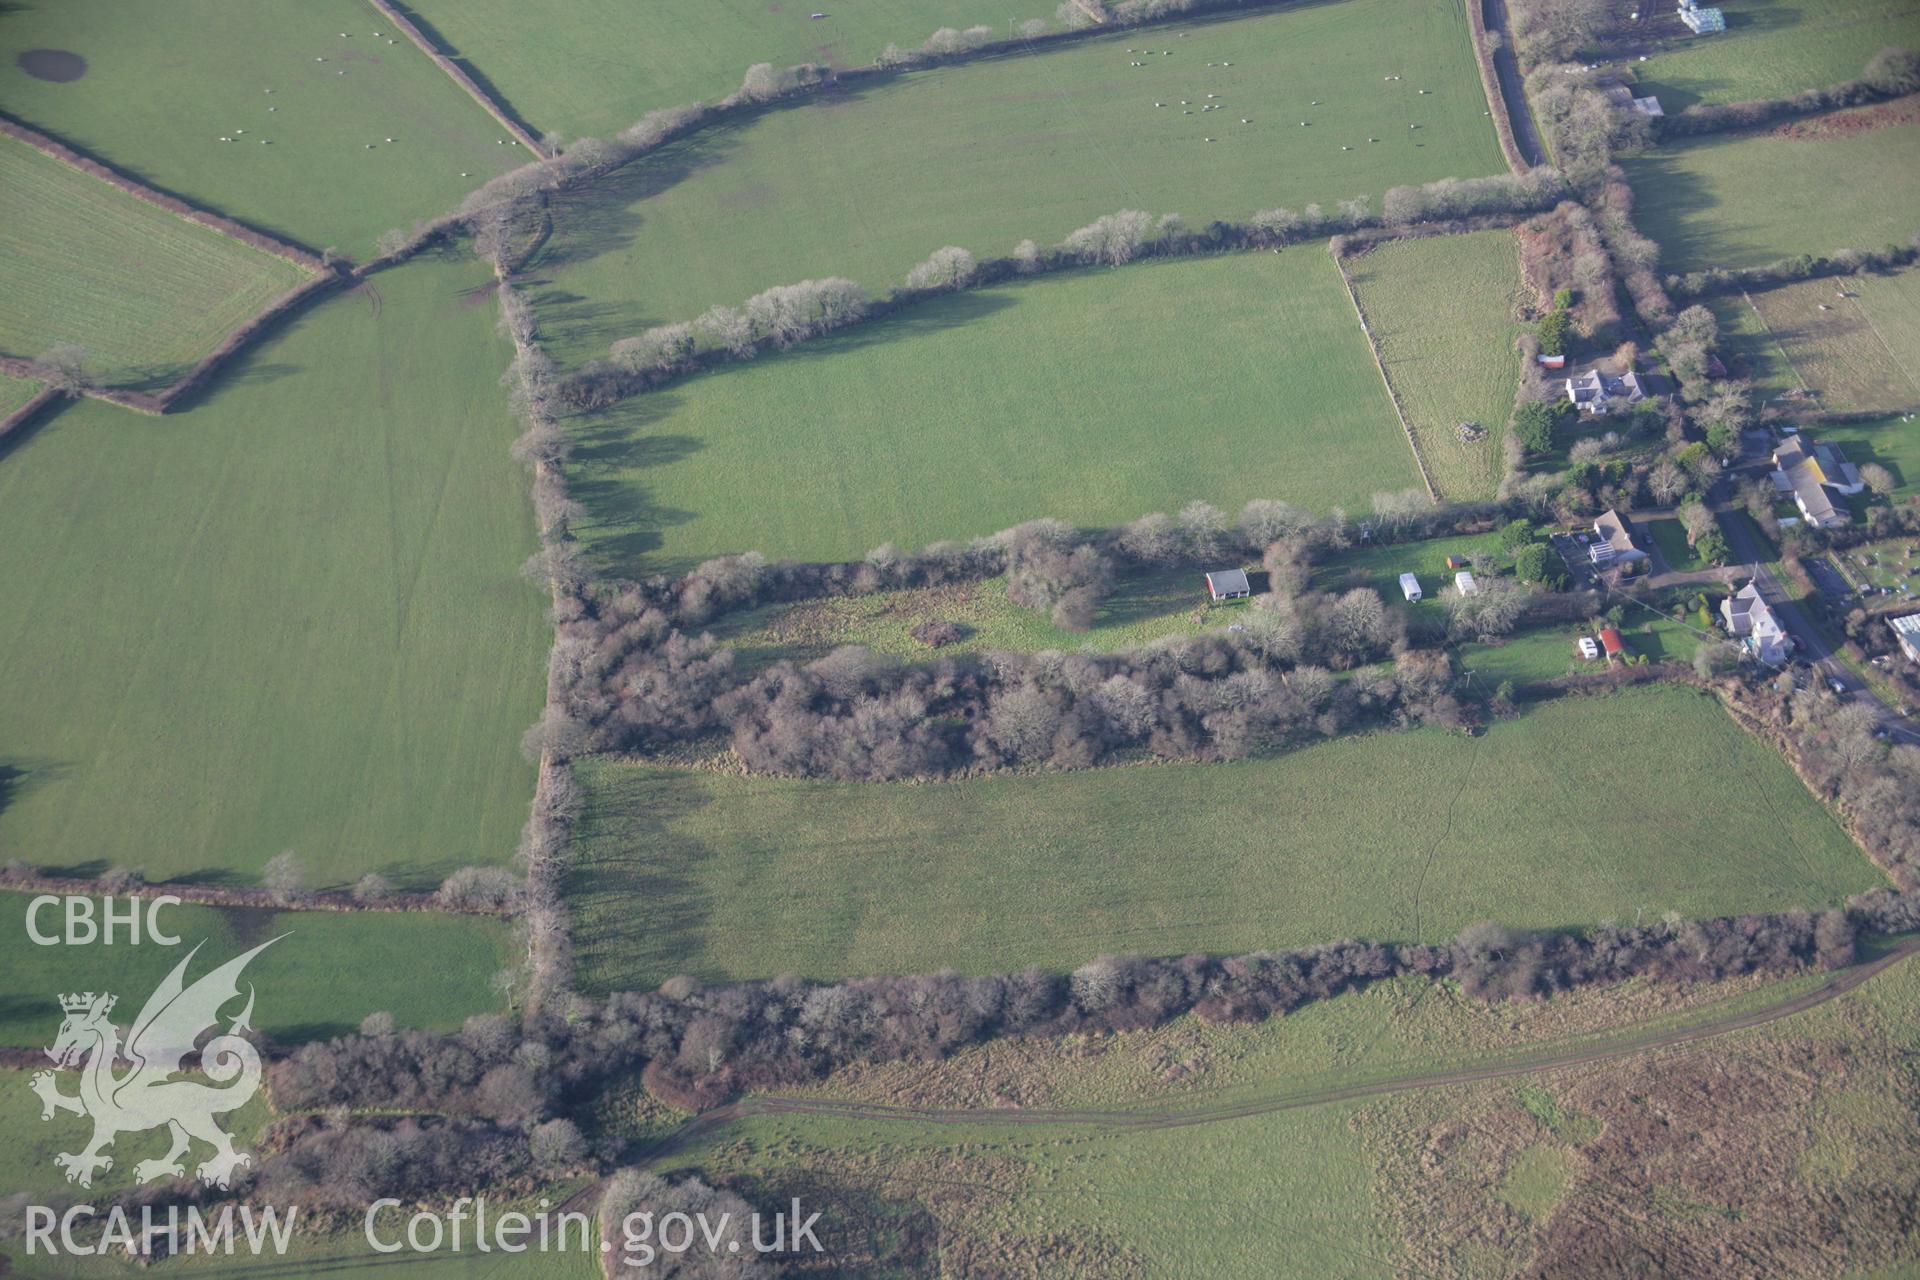 RCAHMW colour oblique aerial photograph of a round barrow south of Rosemary Lane from the east. Taken on 11 January 2006 by Toby Driver.